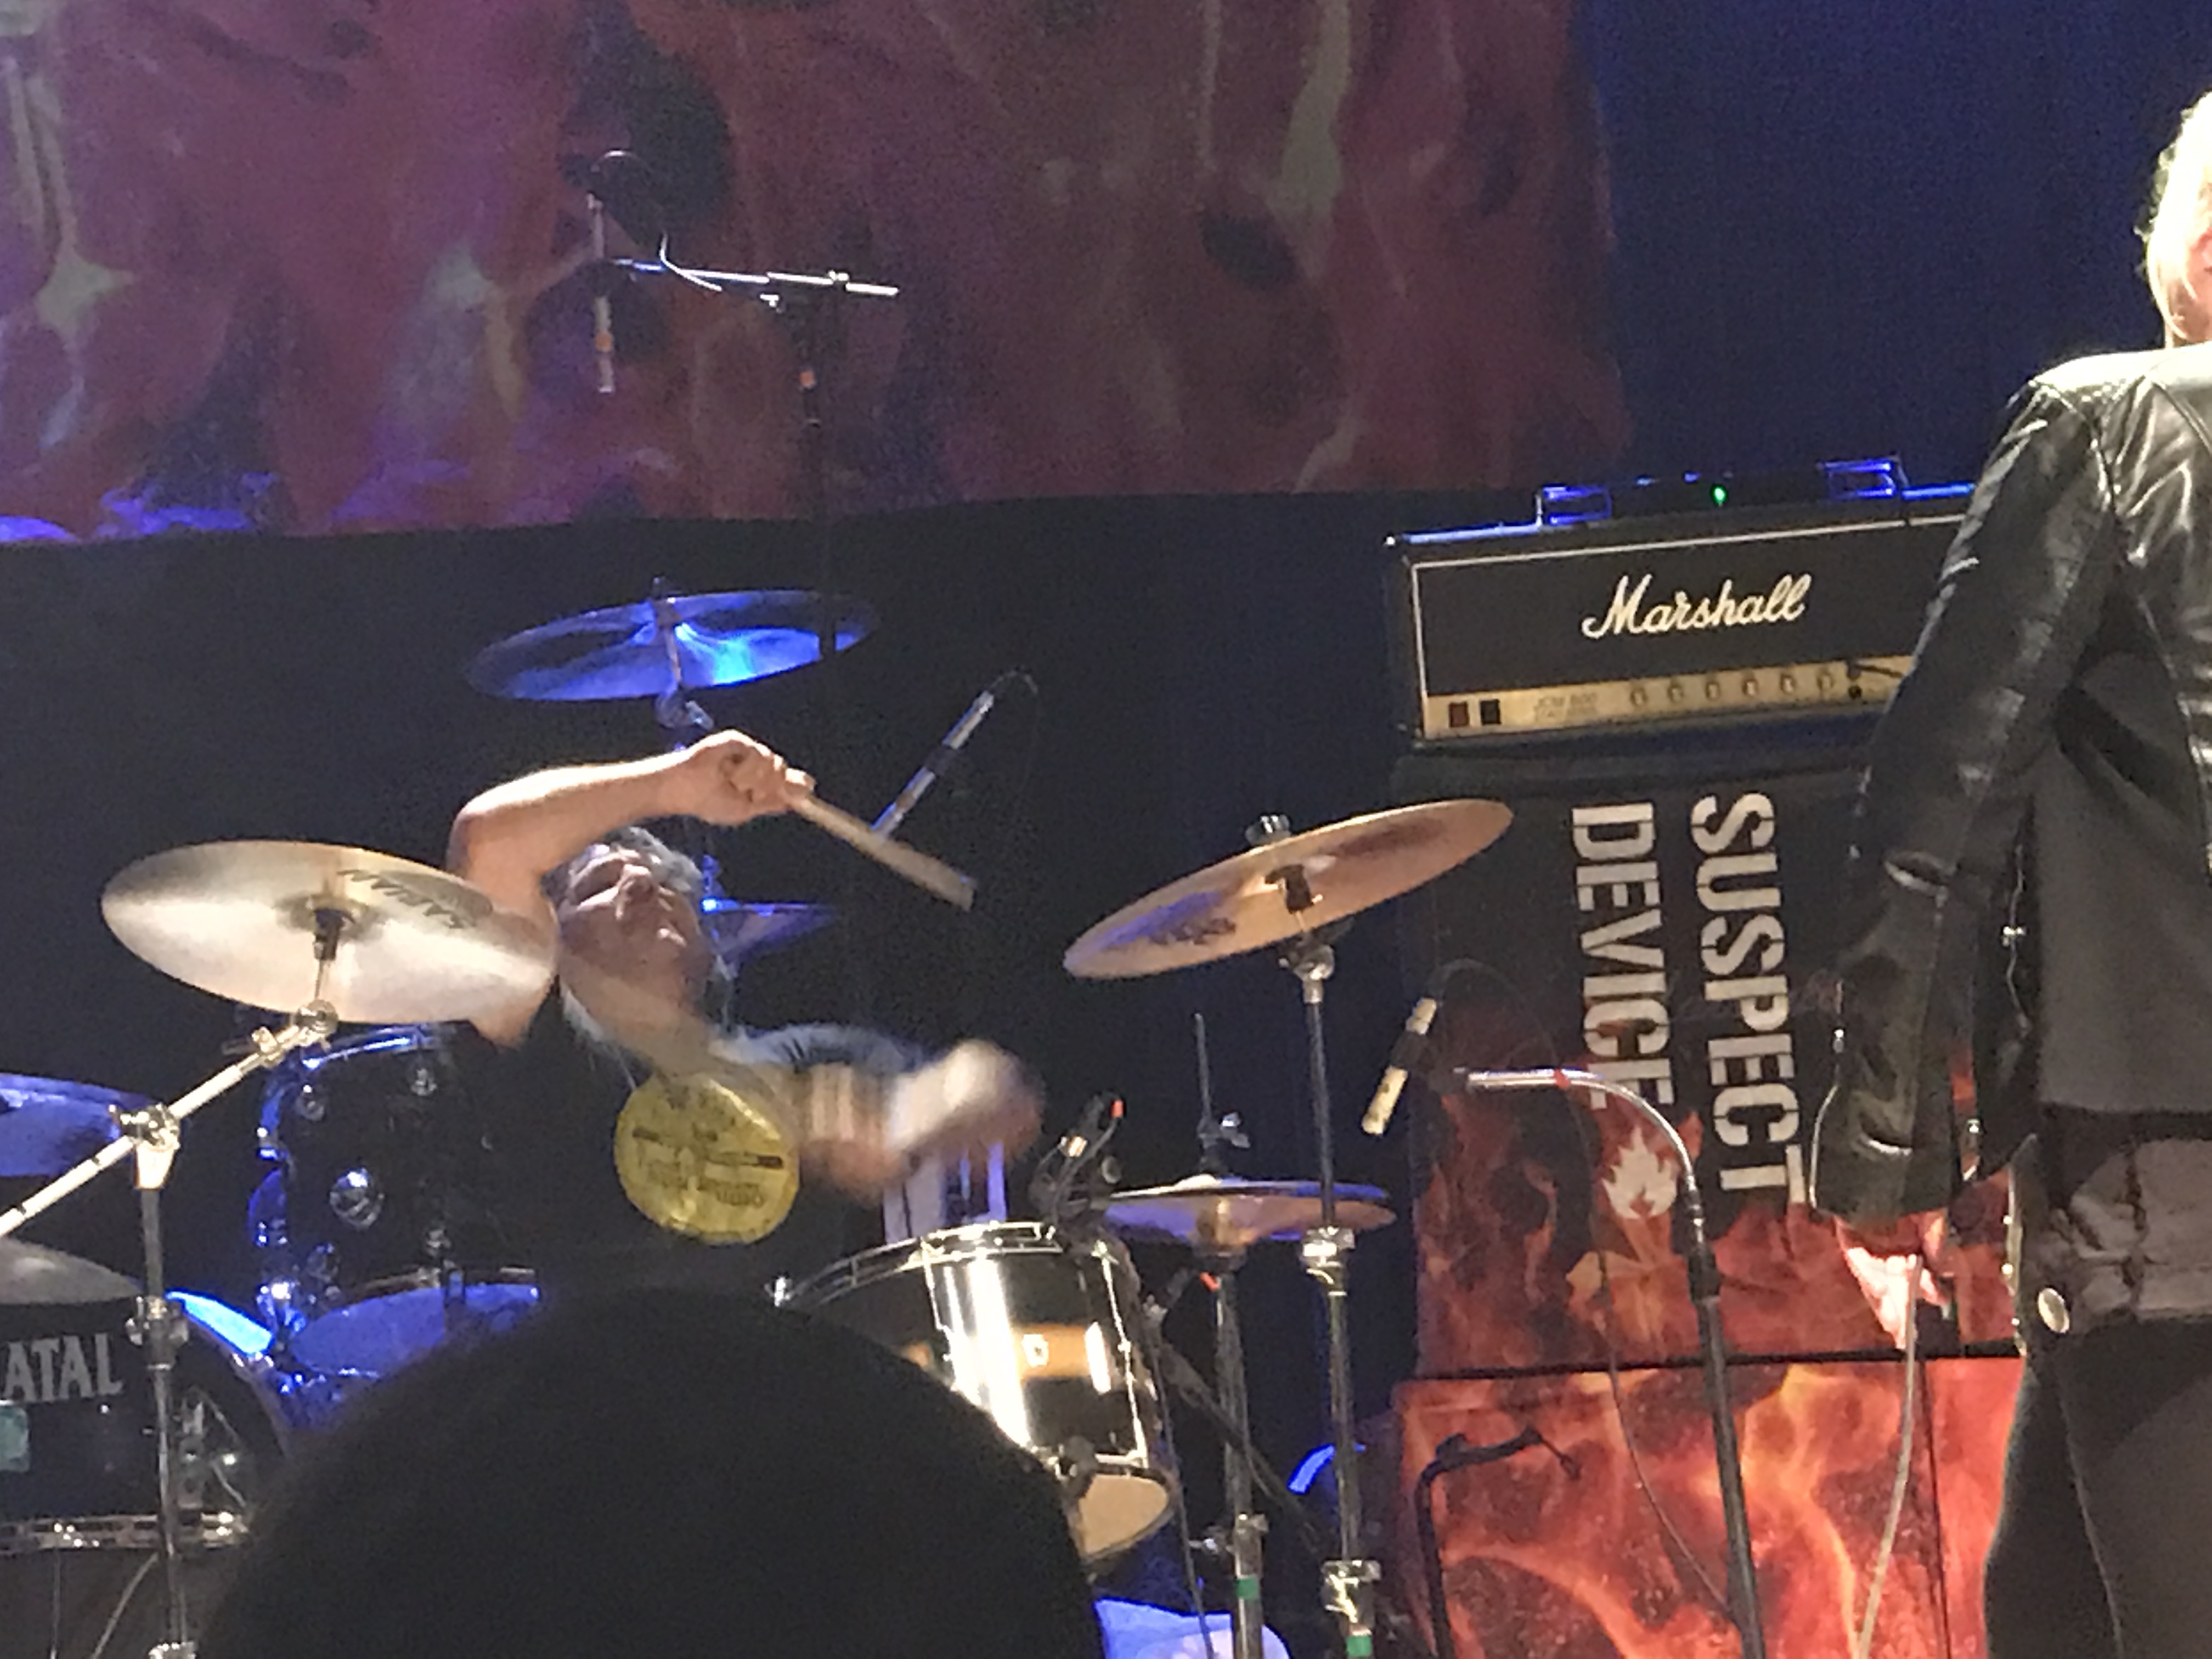 David On Tour with San Francisco's The Avengers in 2019